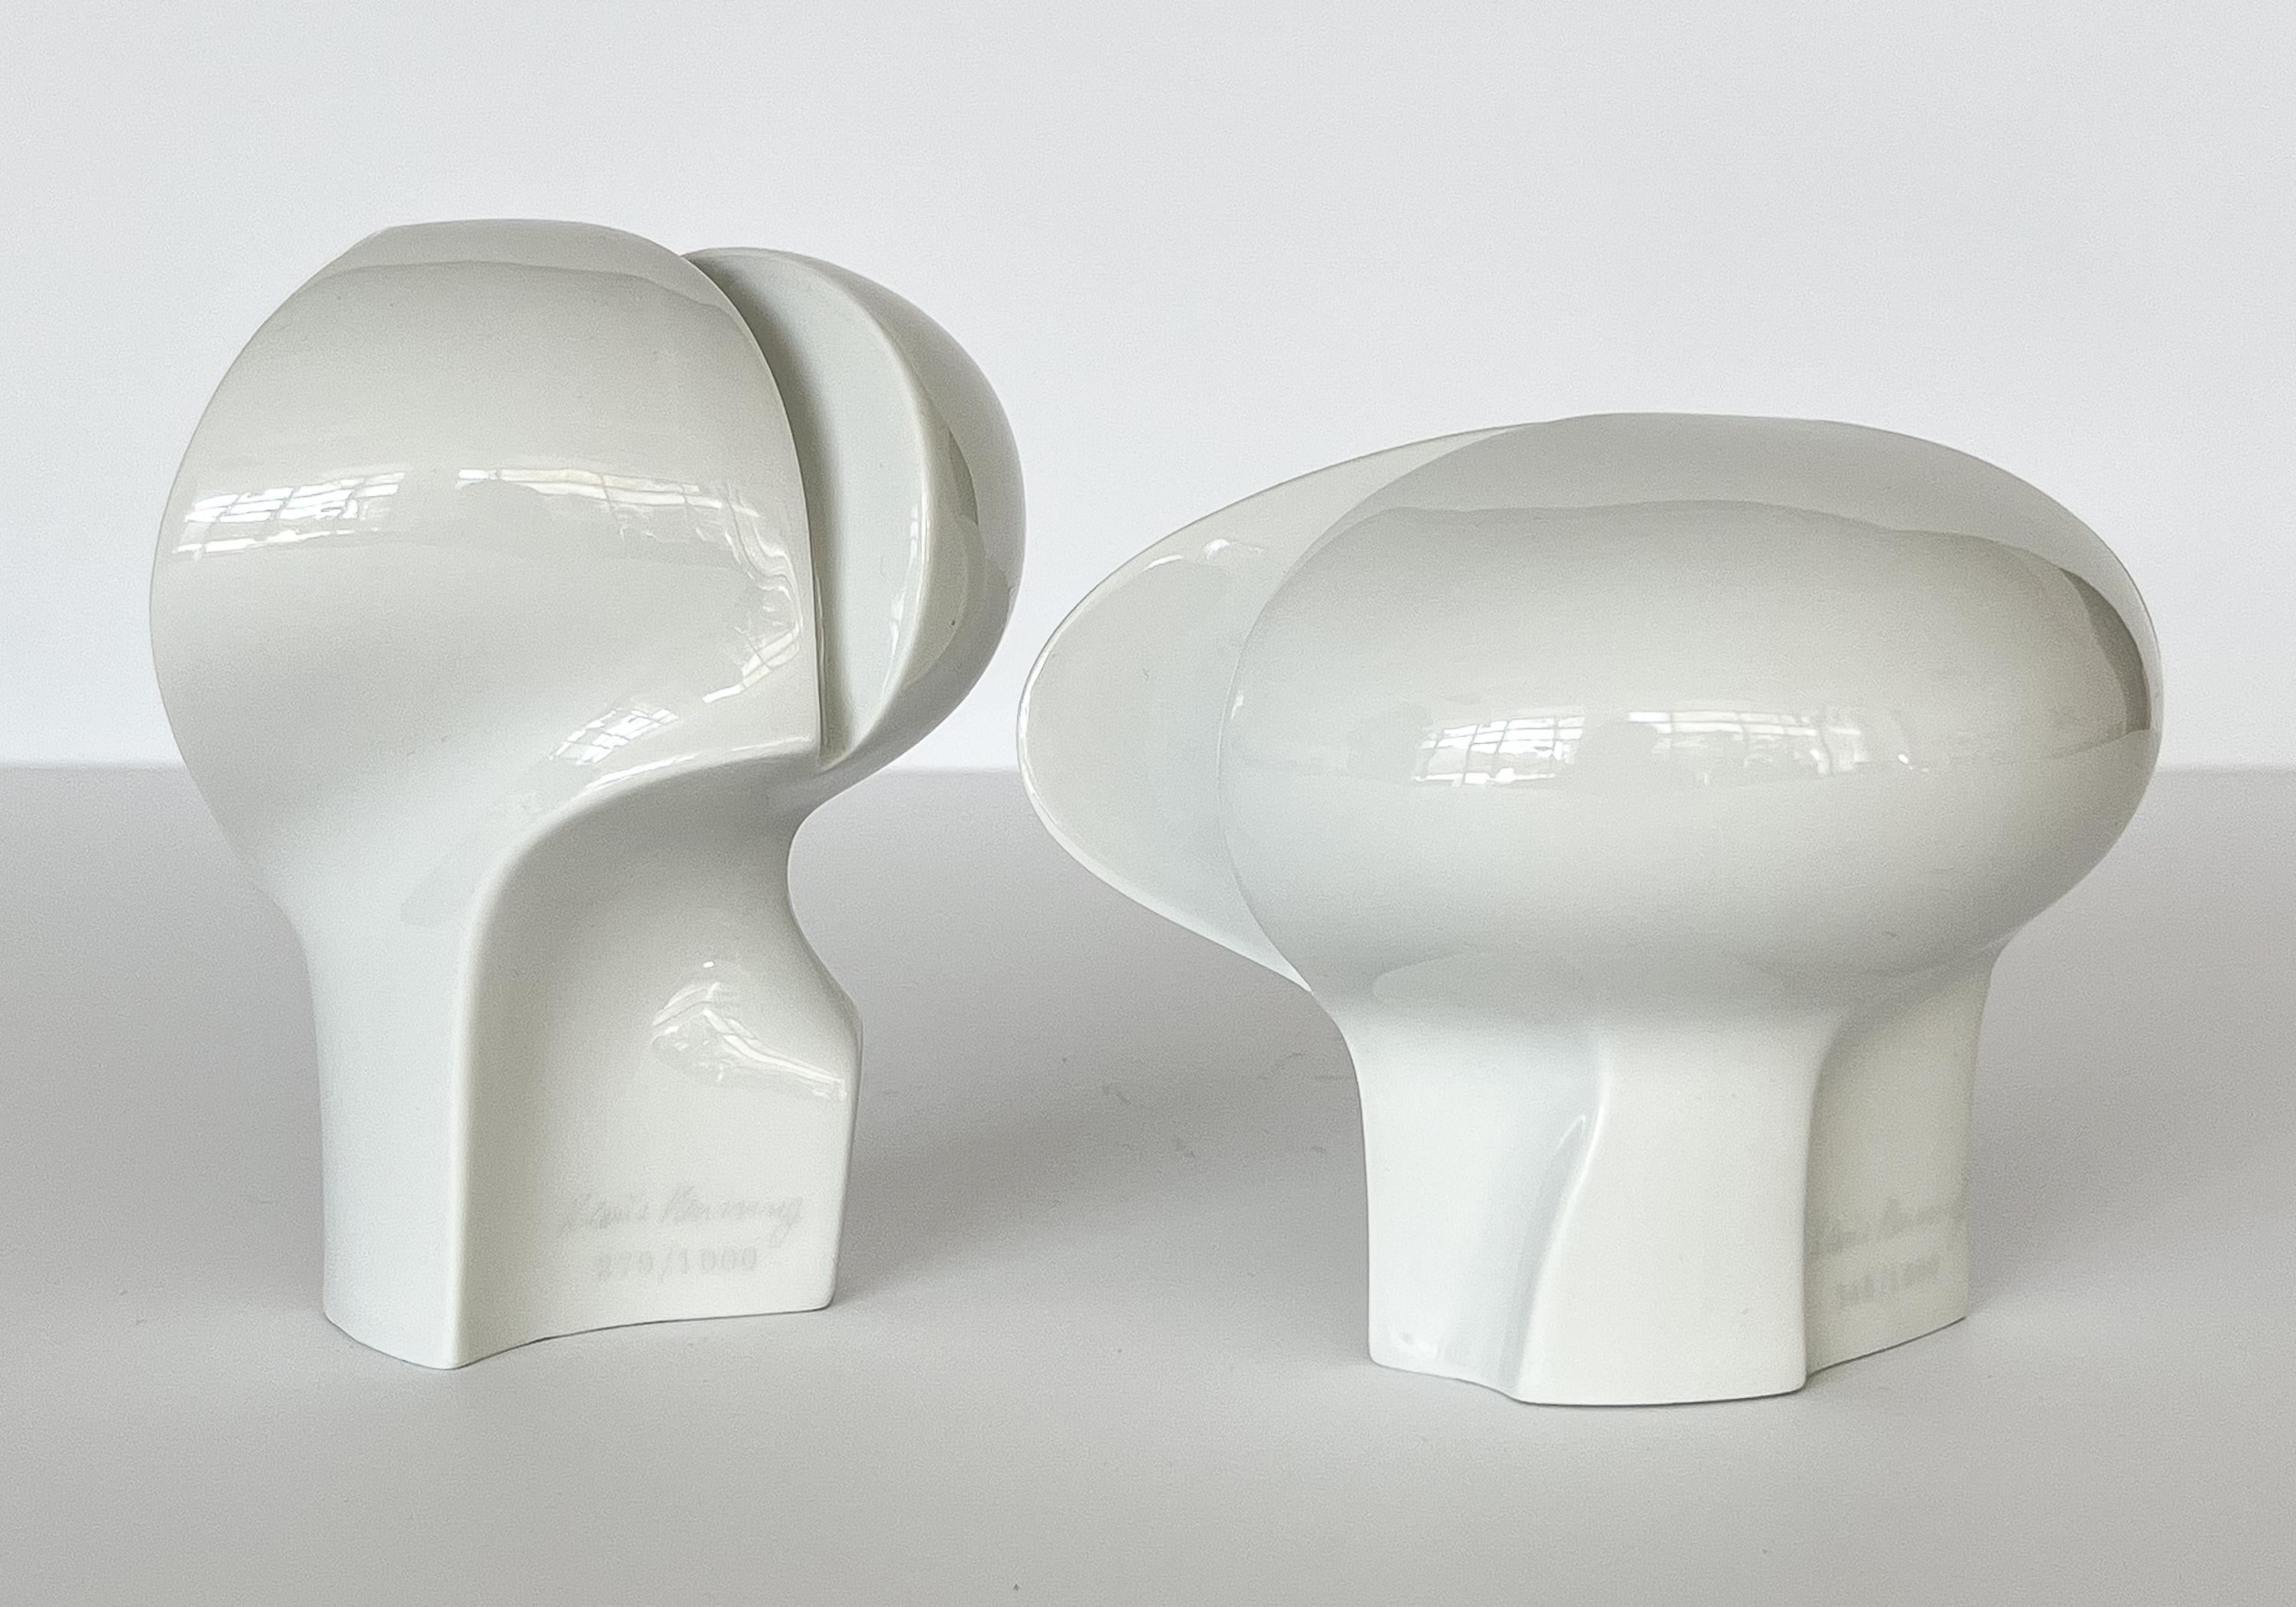 Rare set of two Klaus Henning abstract porcelain sculptures for Fürstenberg, West Germany circa 1960s. Glazed white porcelain abstract / Op Art sculptures. Limited edition of 1000 pieces each. Tall sculpture measures 6